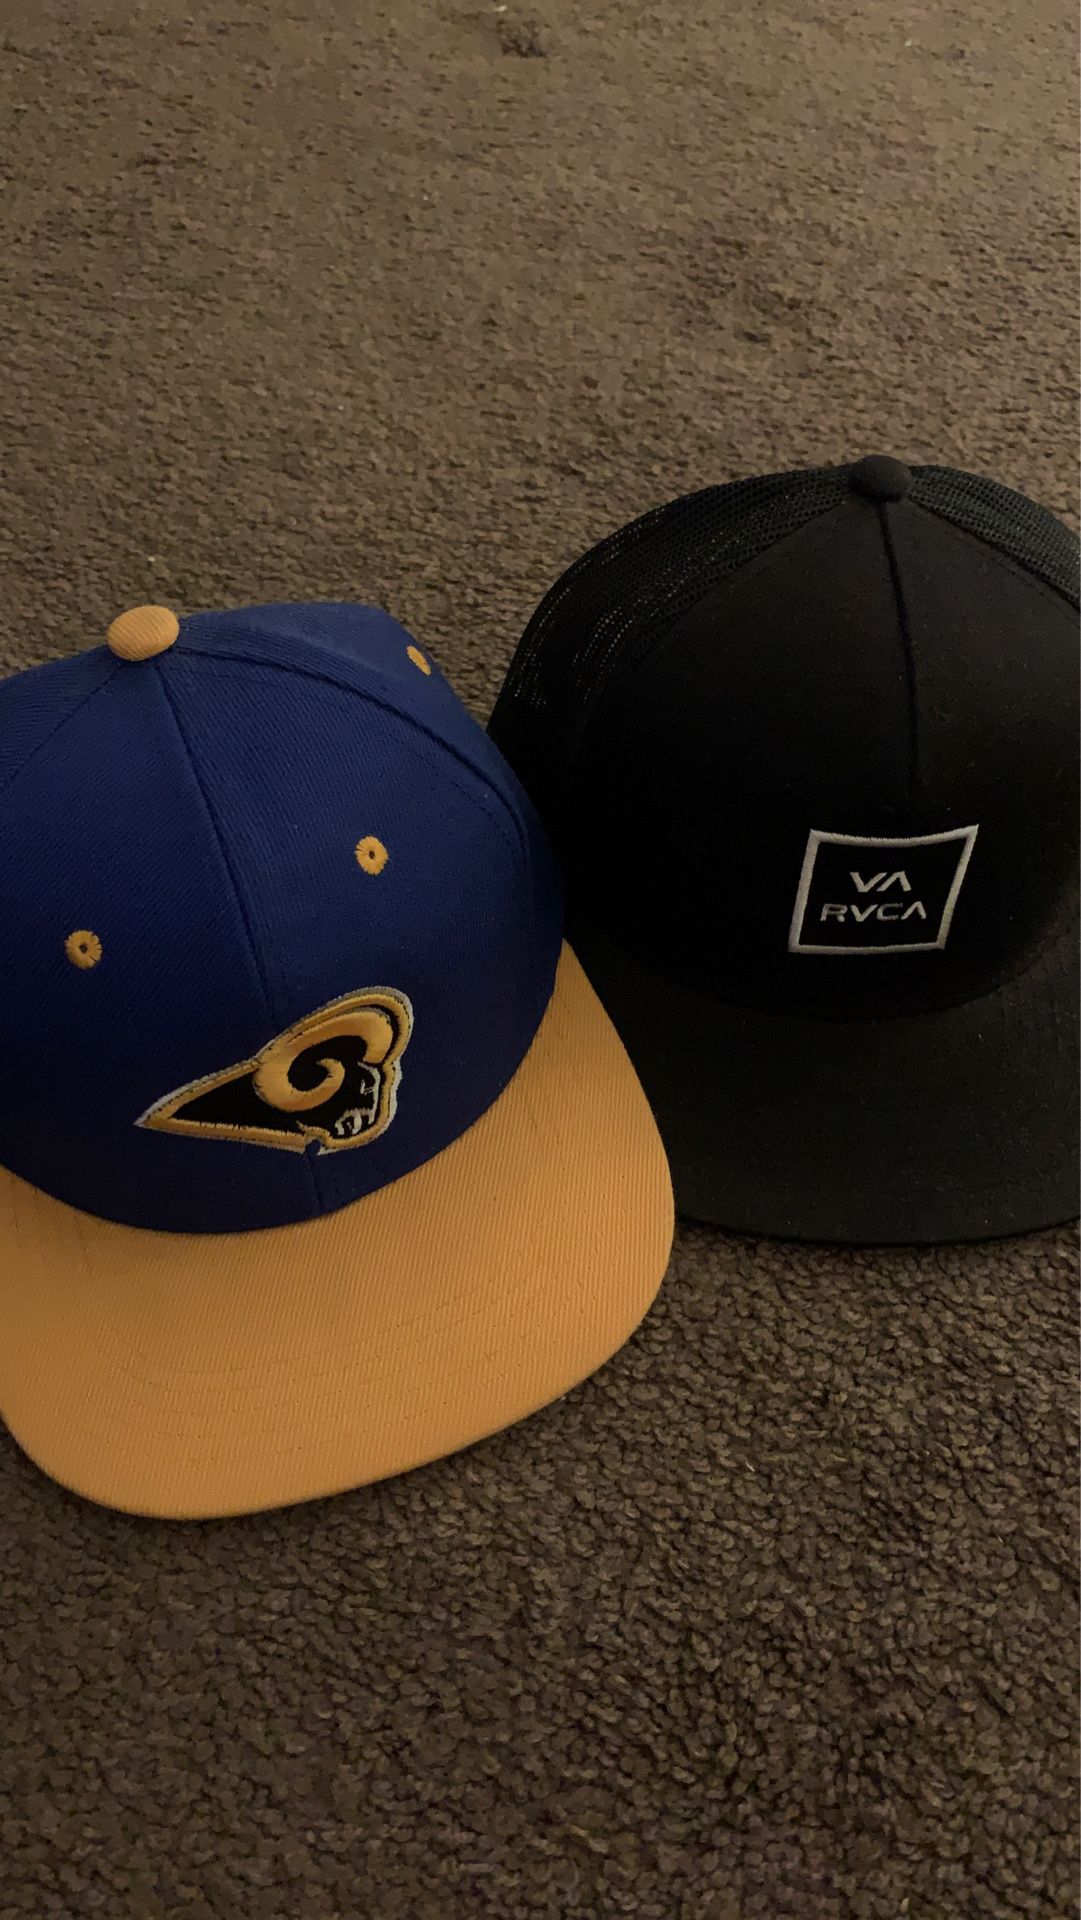 Hats Rams and RVCA SnapBack slightly used. $7 each 2 for $10 OBo